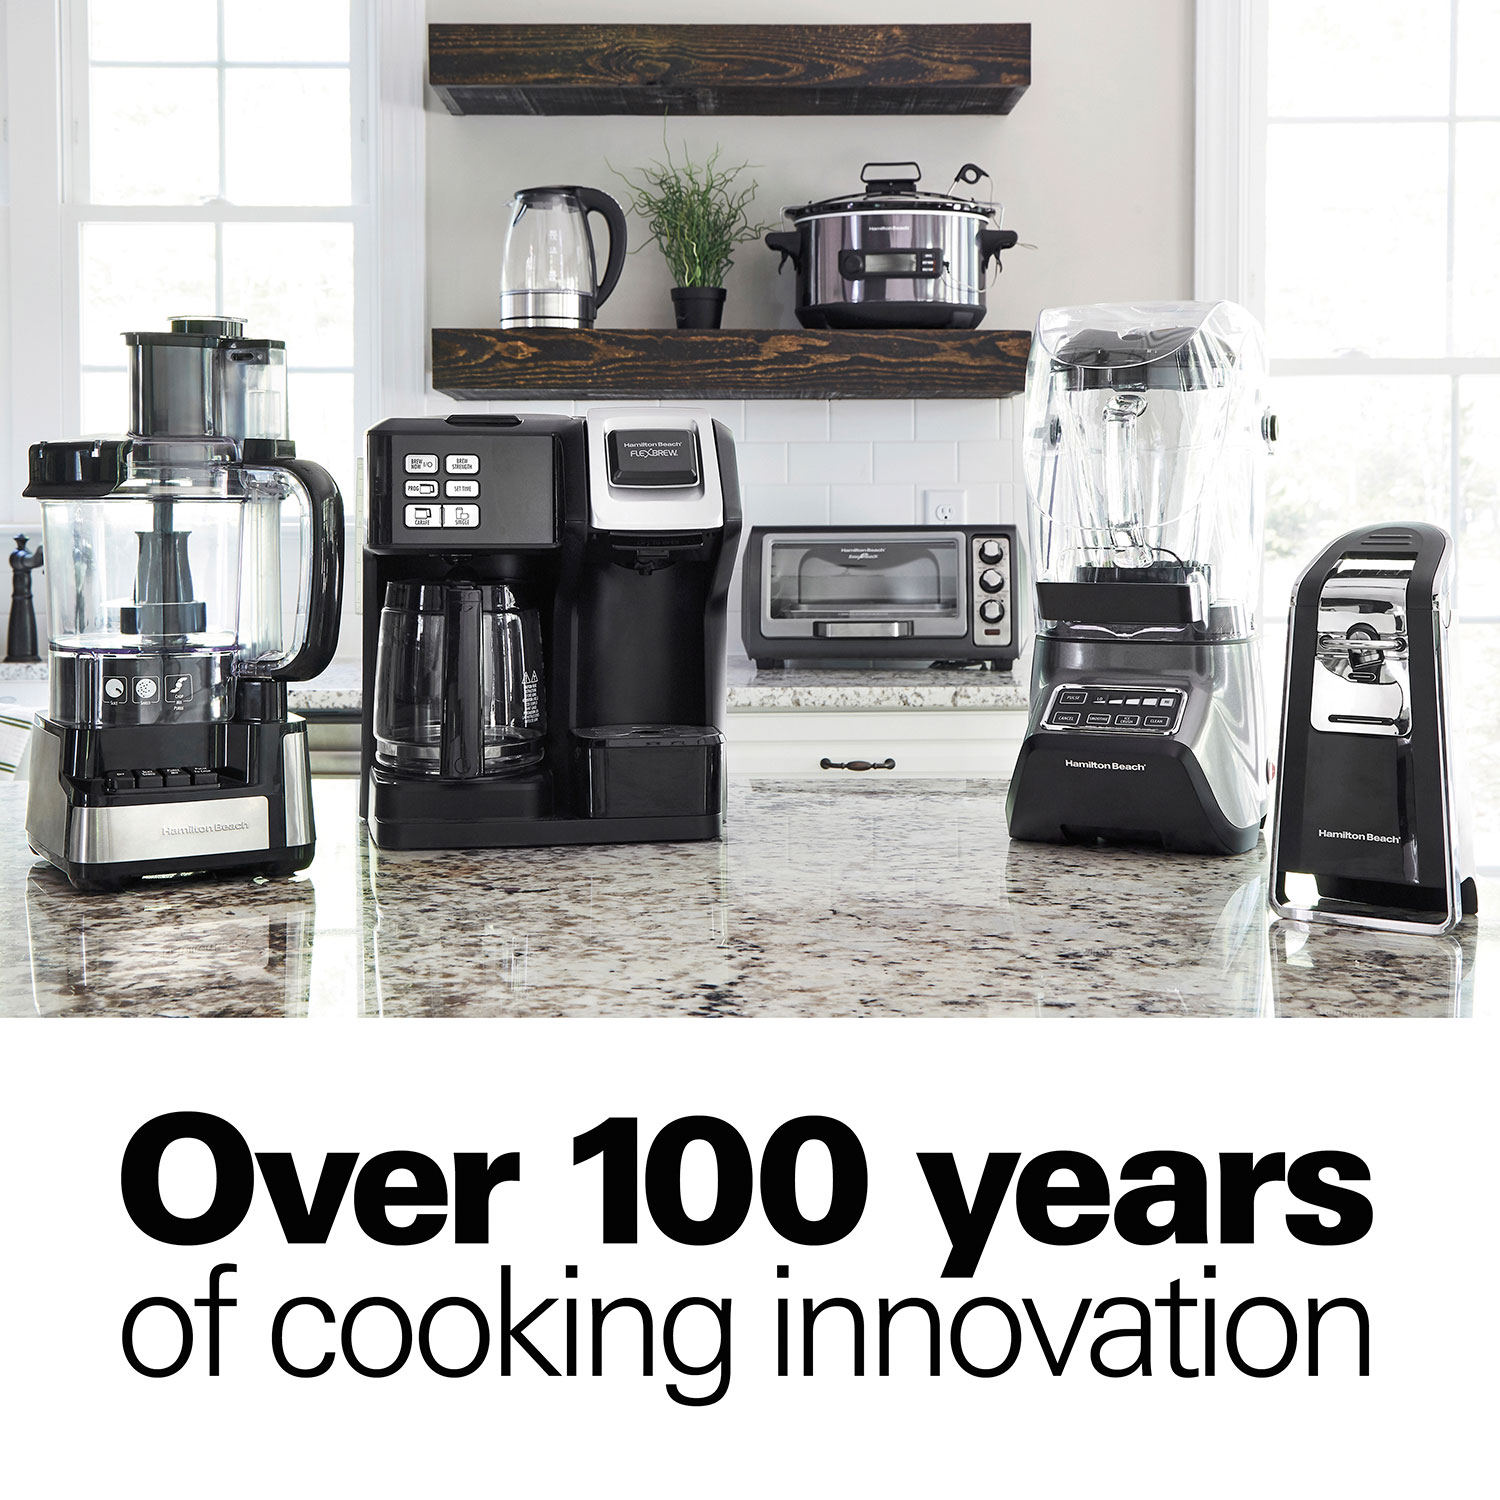 Over 100 years of cooking innovation